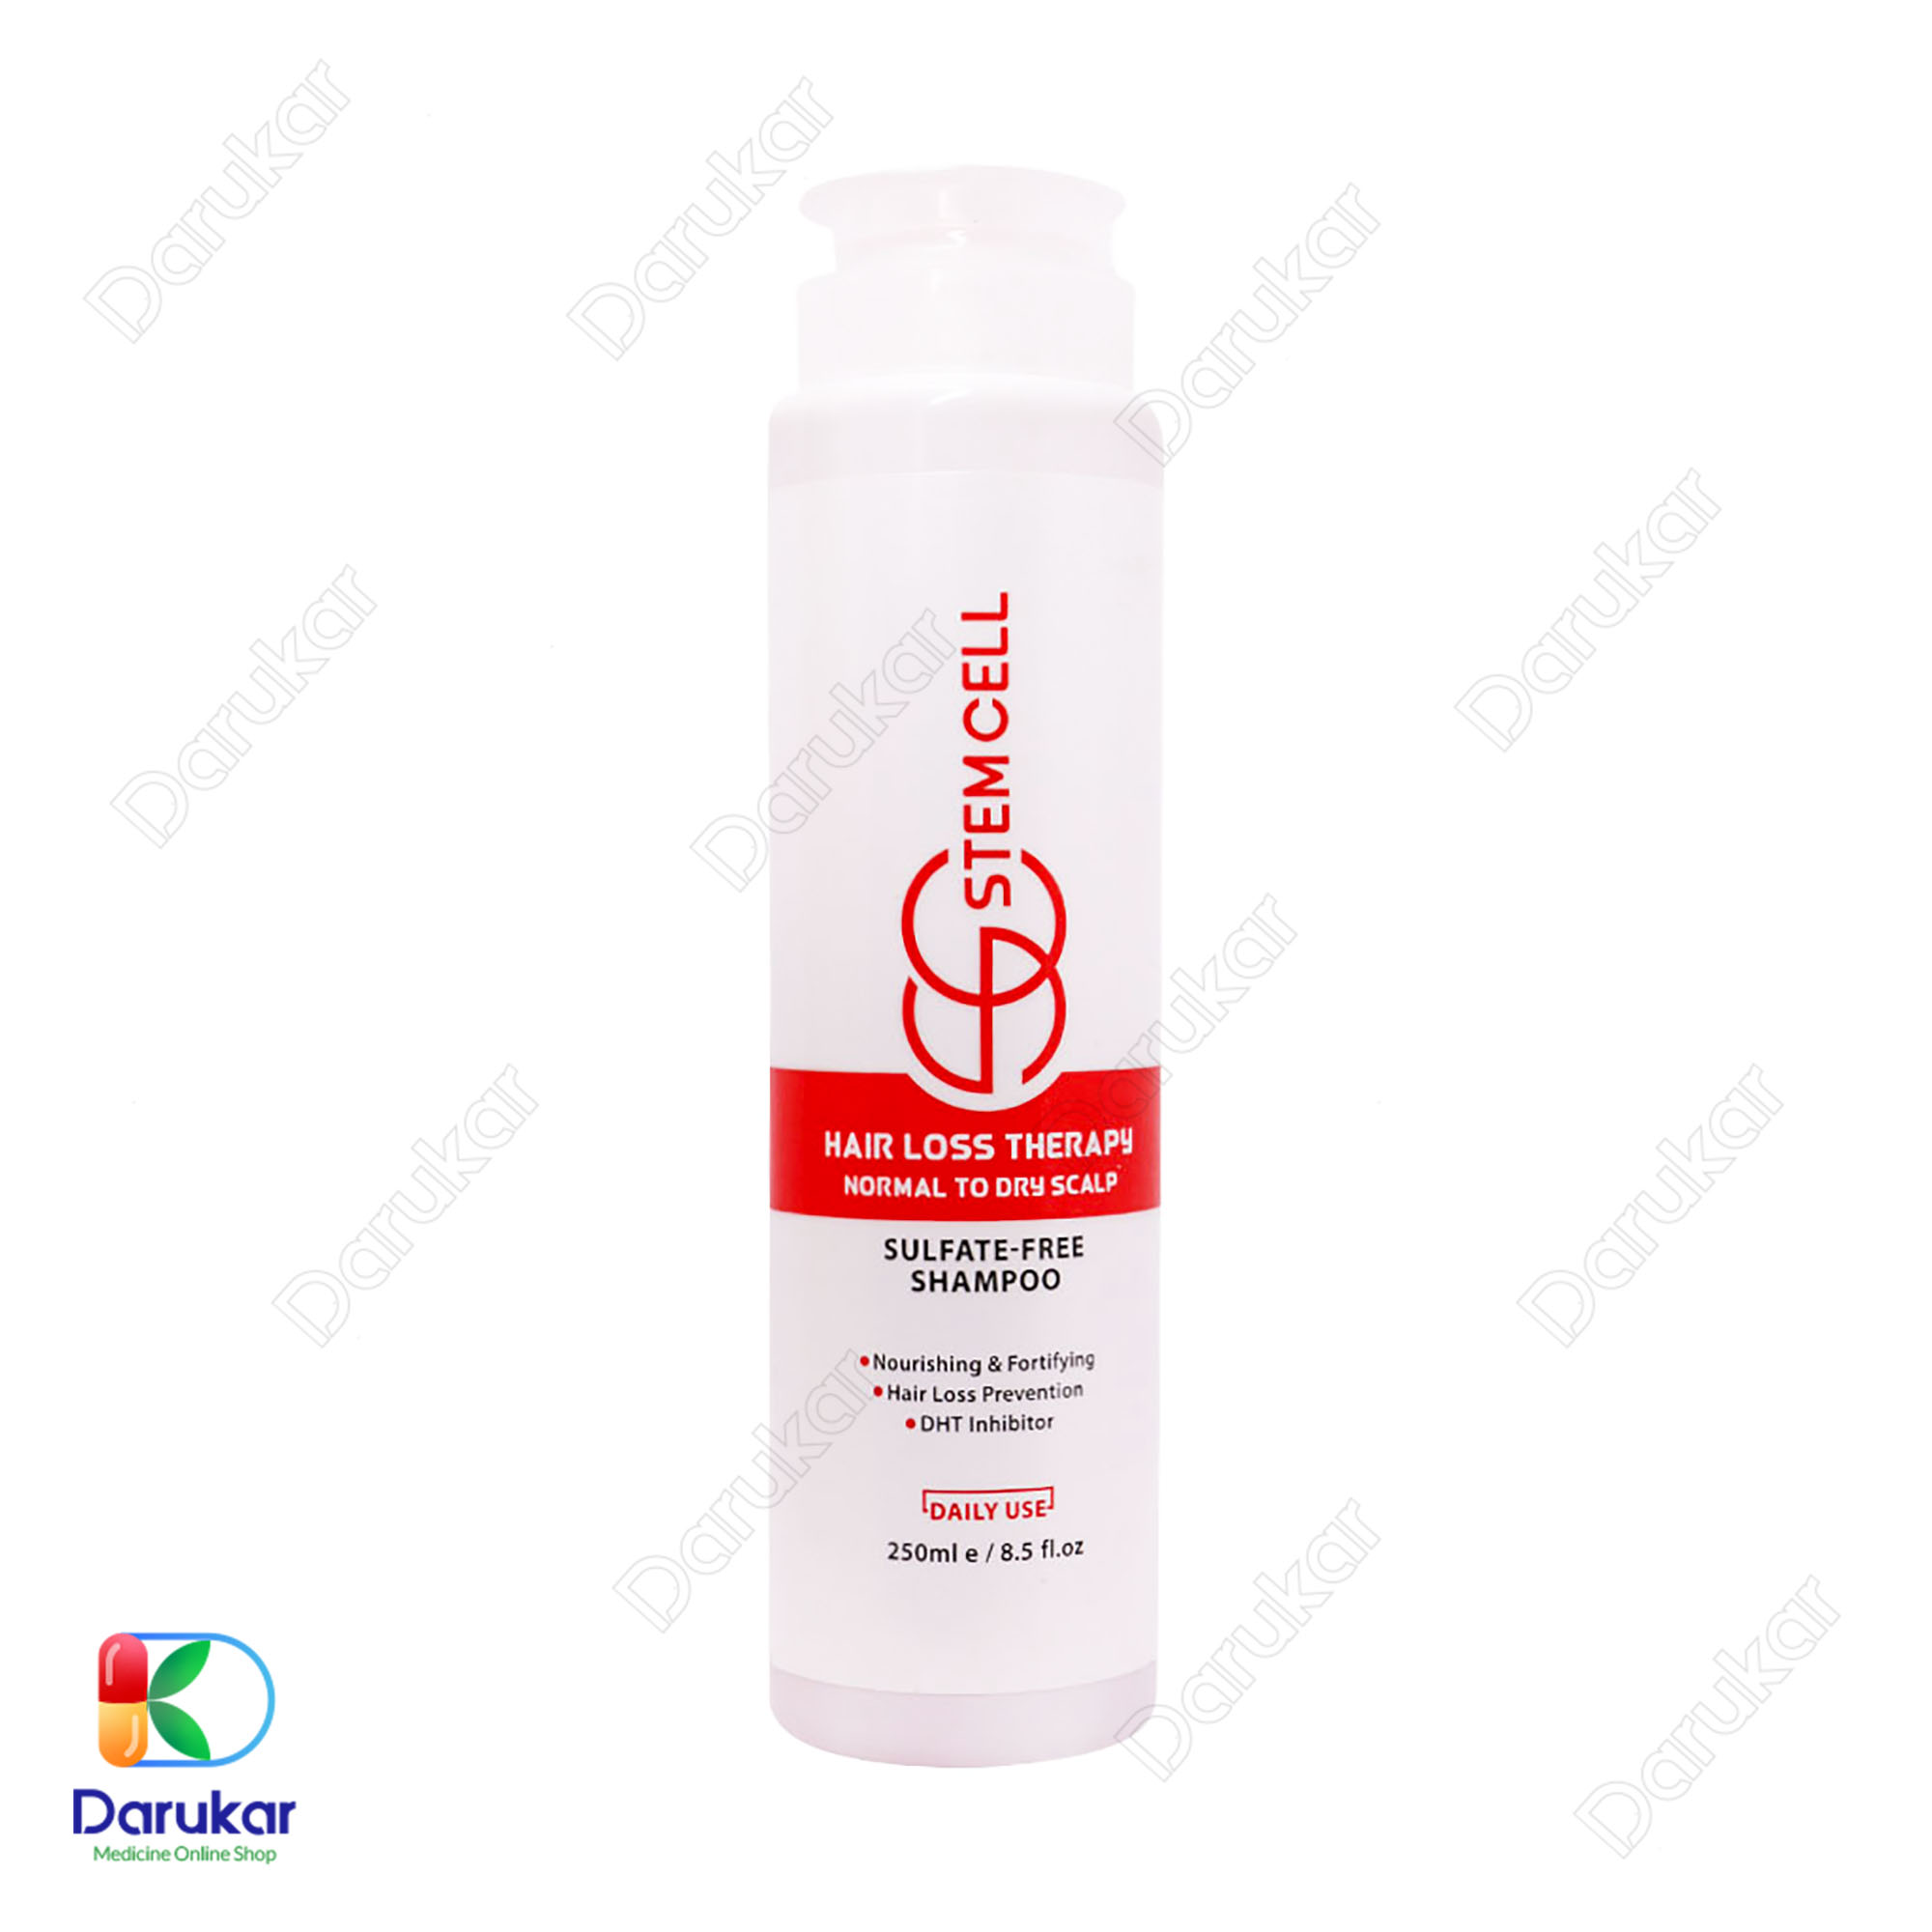 stem cell hair loss therapy shampoo 1